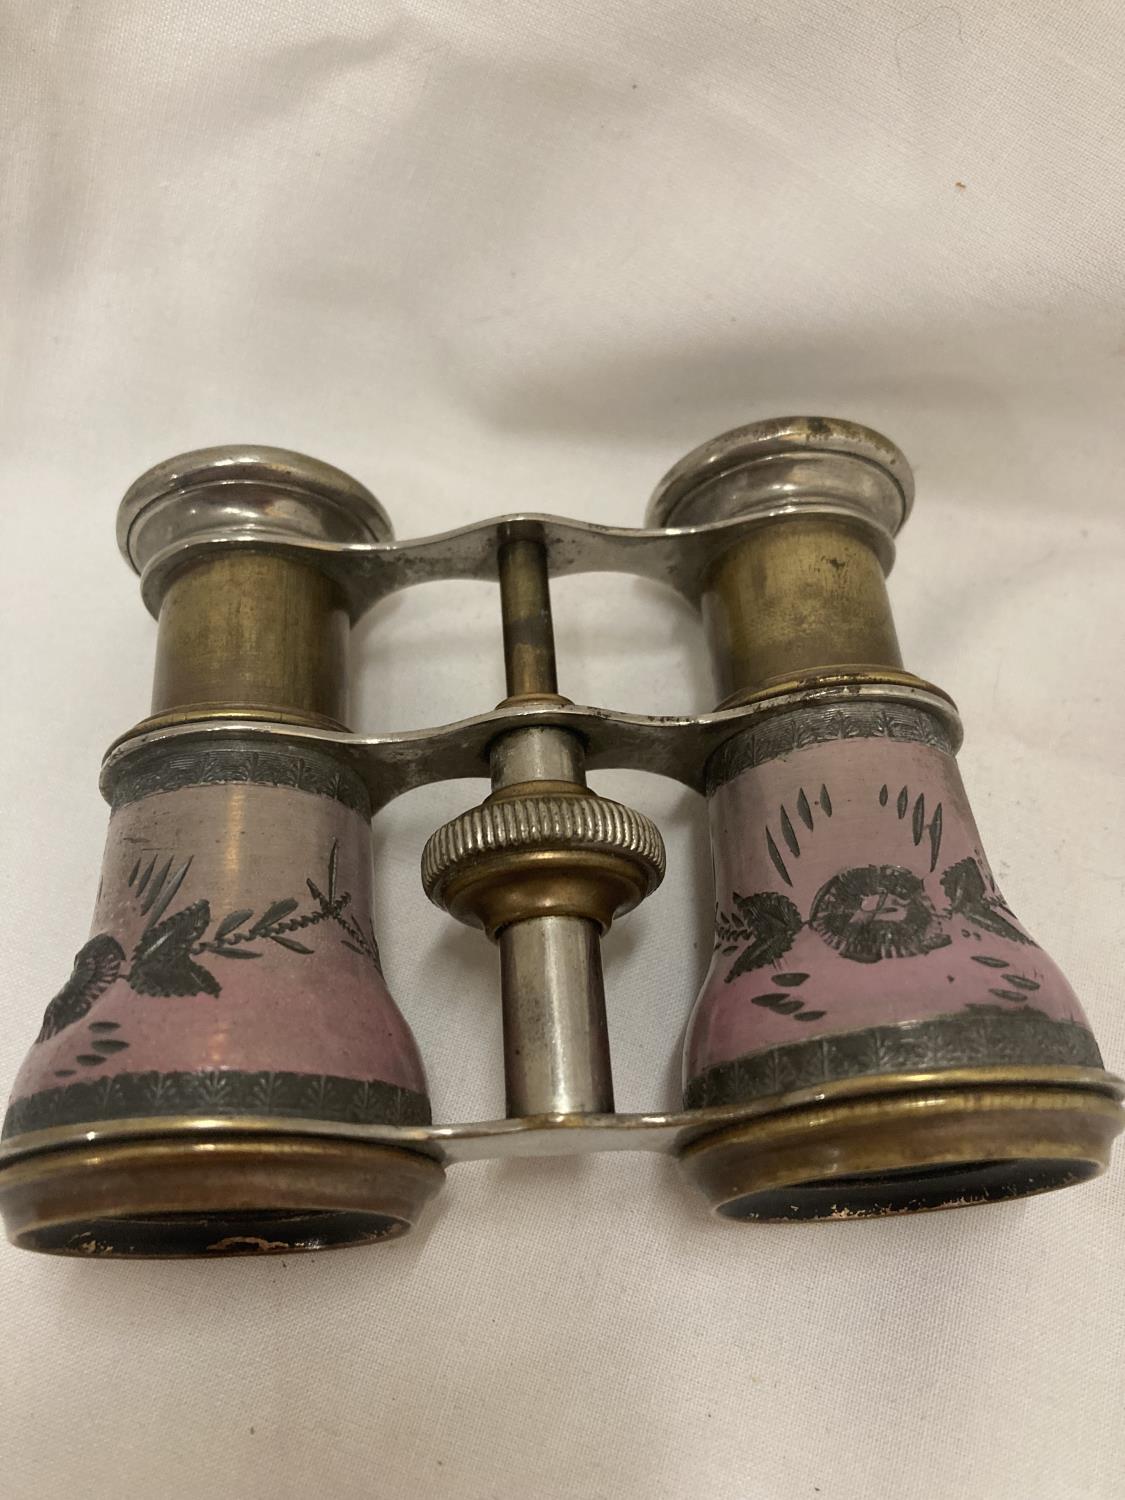 A VINTAGE PAIR OF 'LAMIER' PARIS OPERA GLASSES WITH PINK ENAMELLED DECORATION - Image 2 of 5